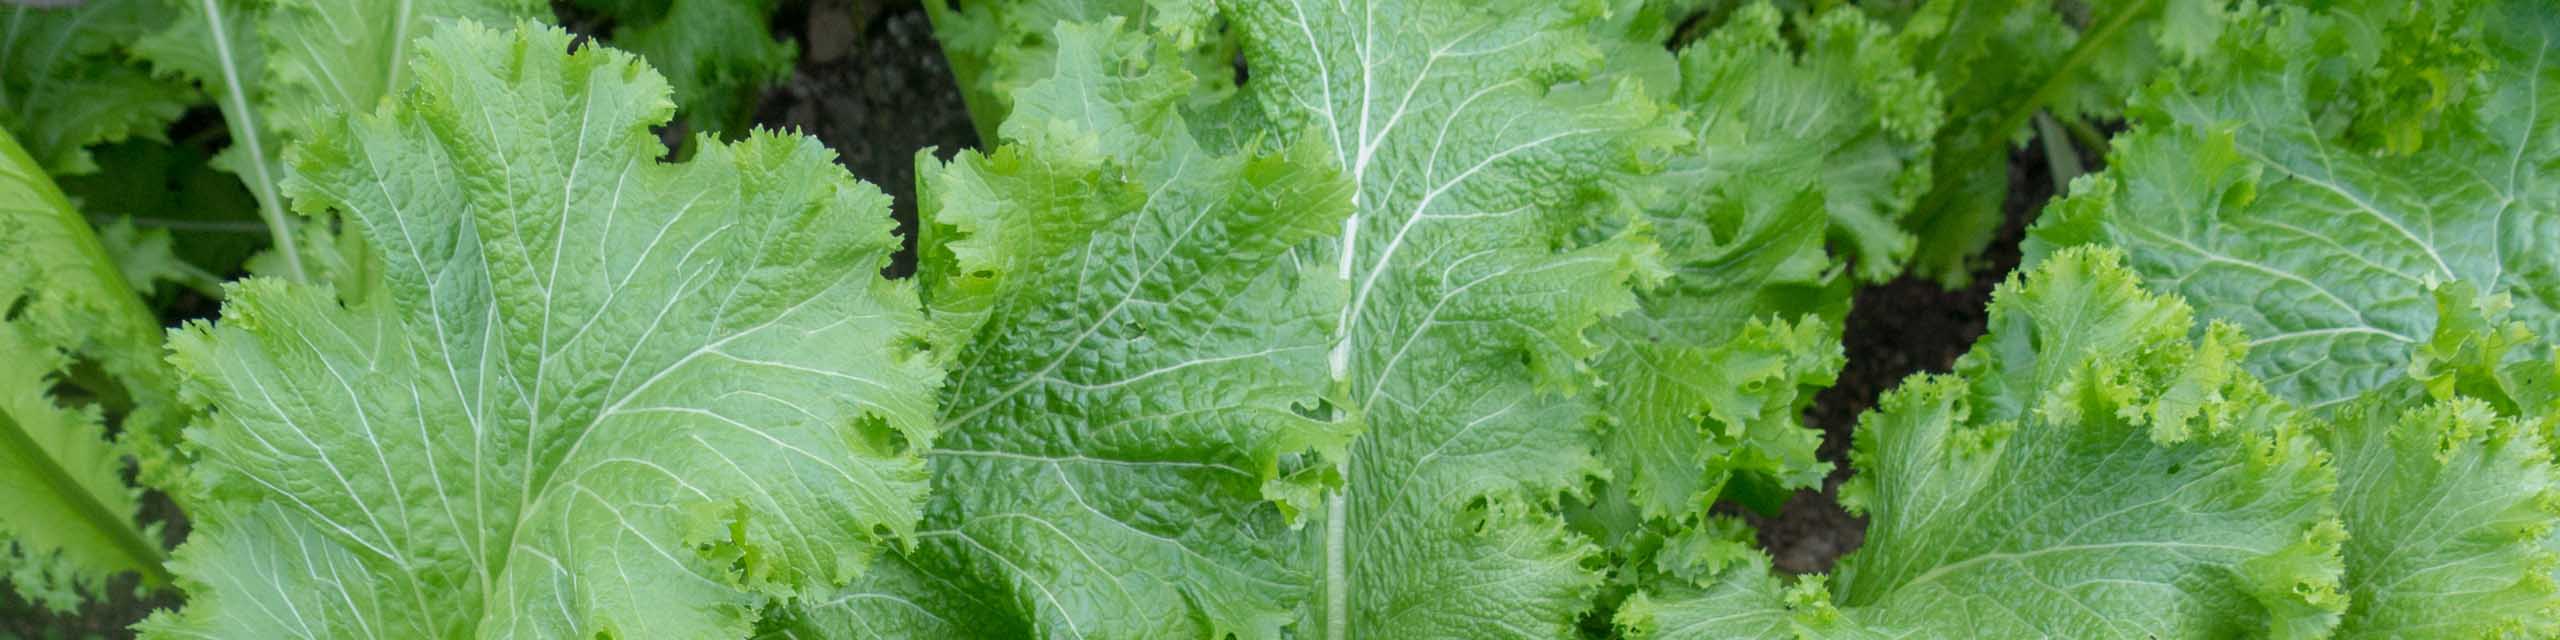 Close up of mustard greens growing in the garden.